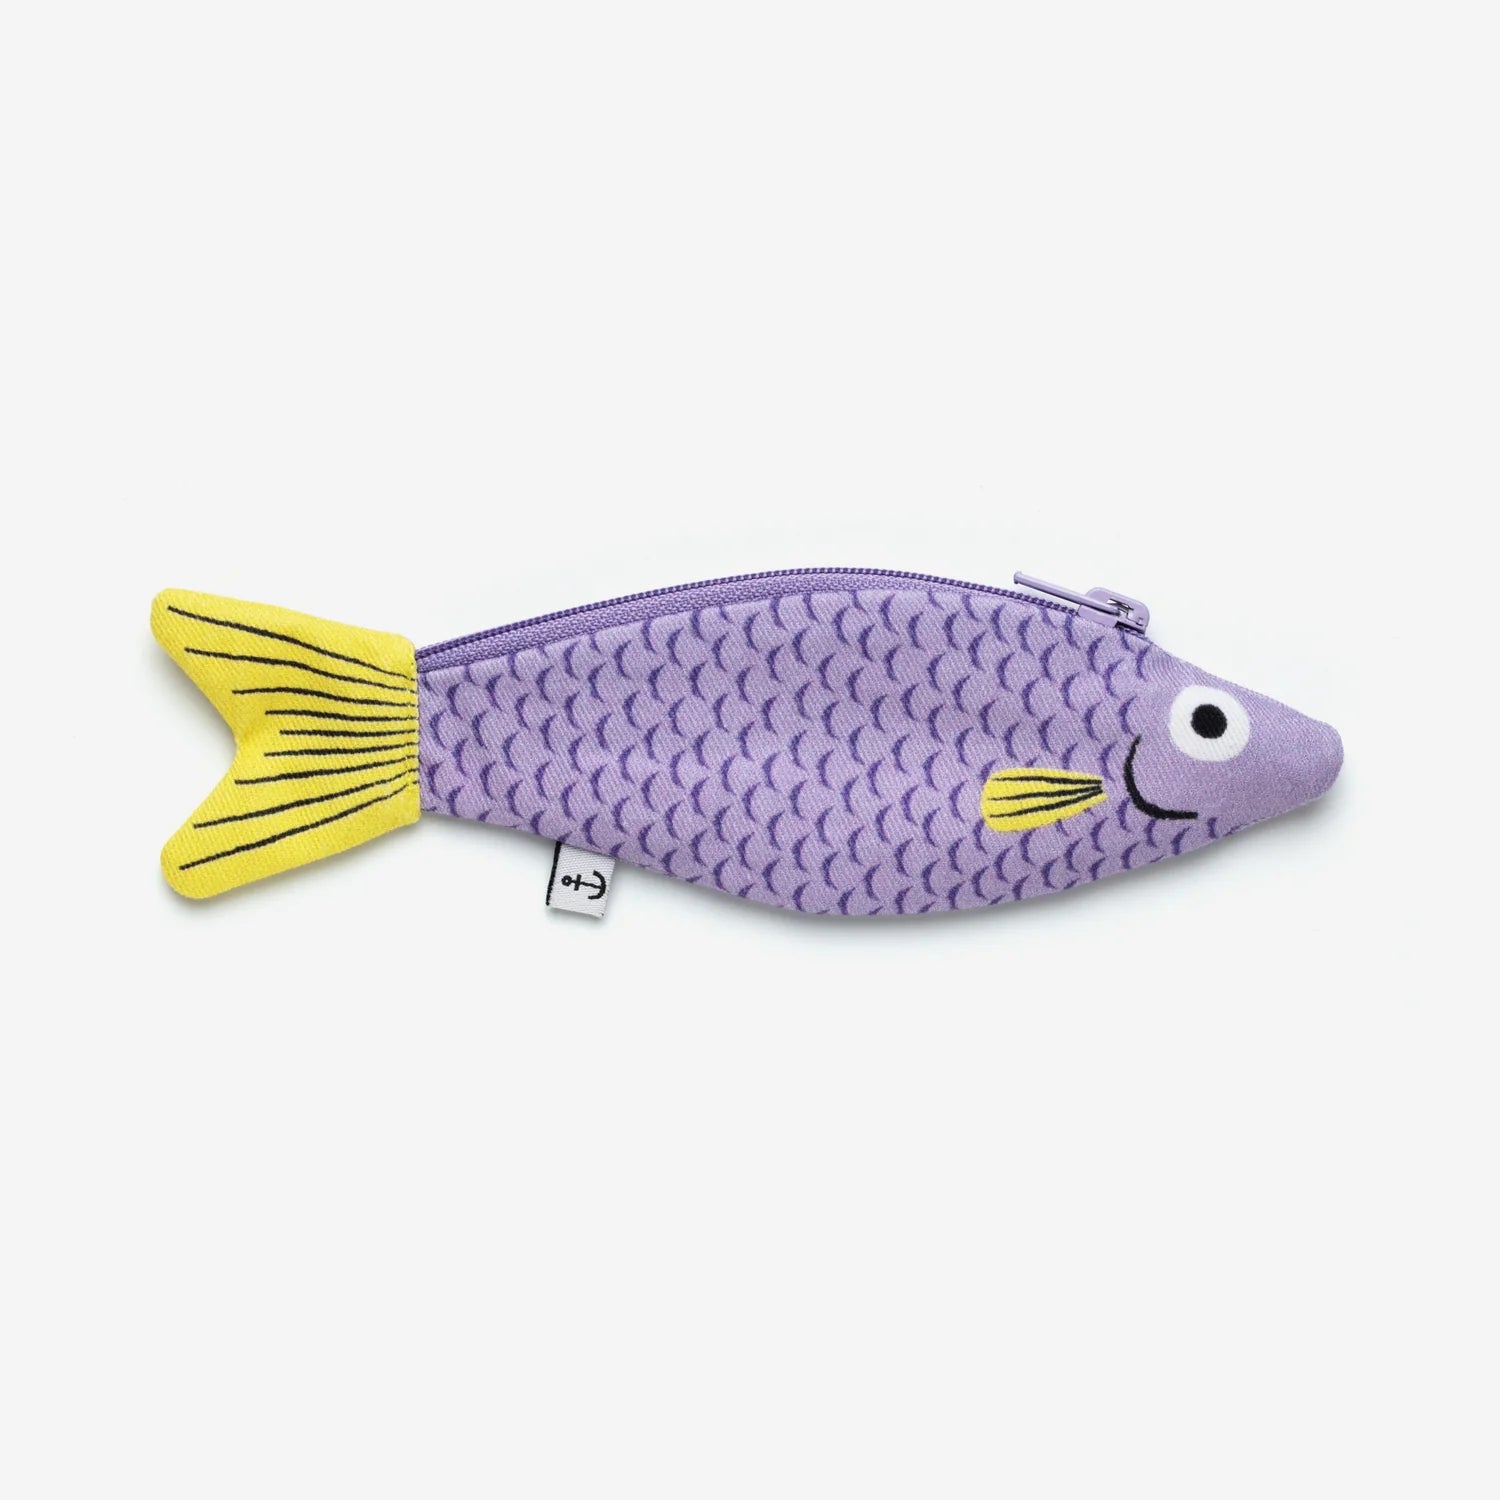 Zippered pouch made to look like a fish -- fish has a lilac colored body and yellow tail 